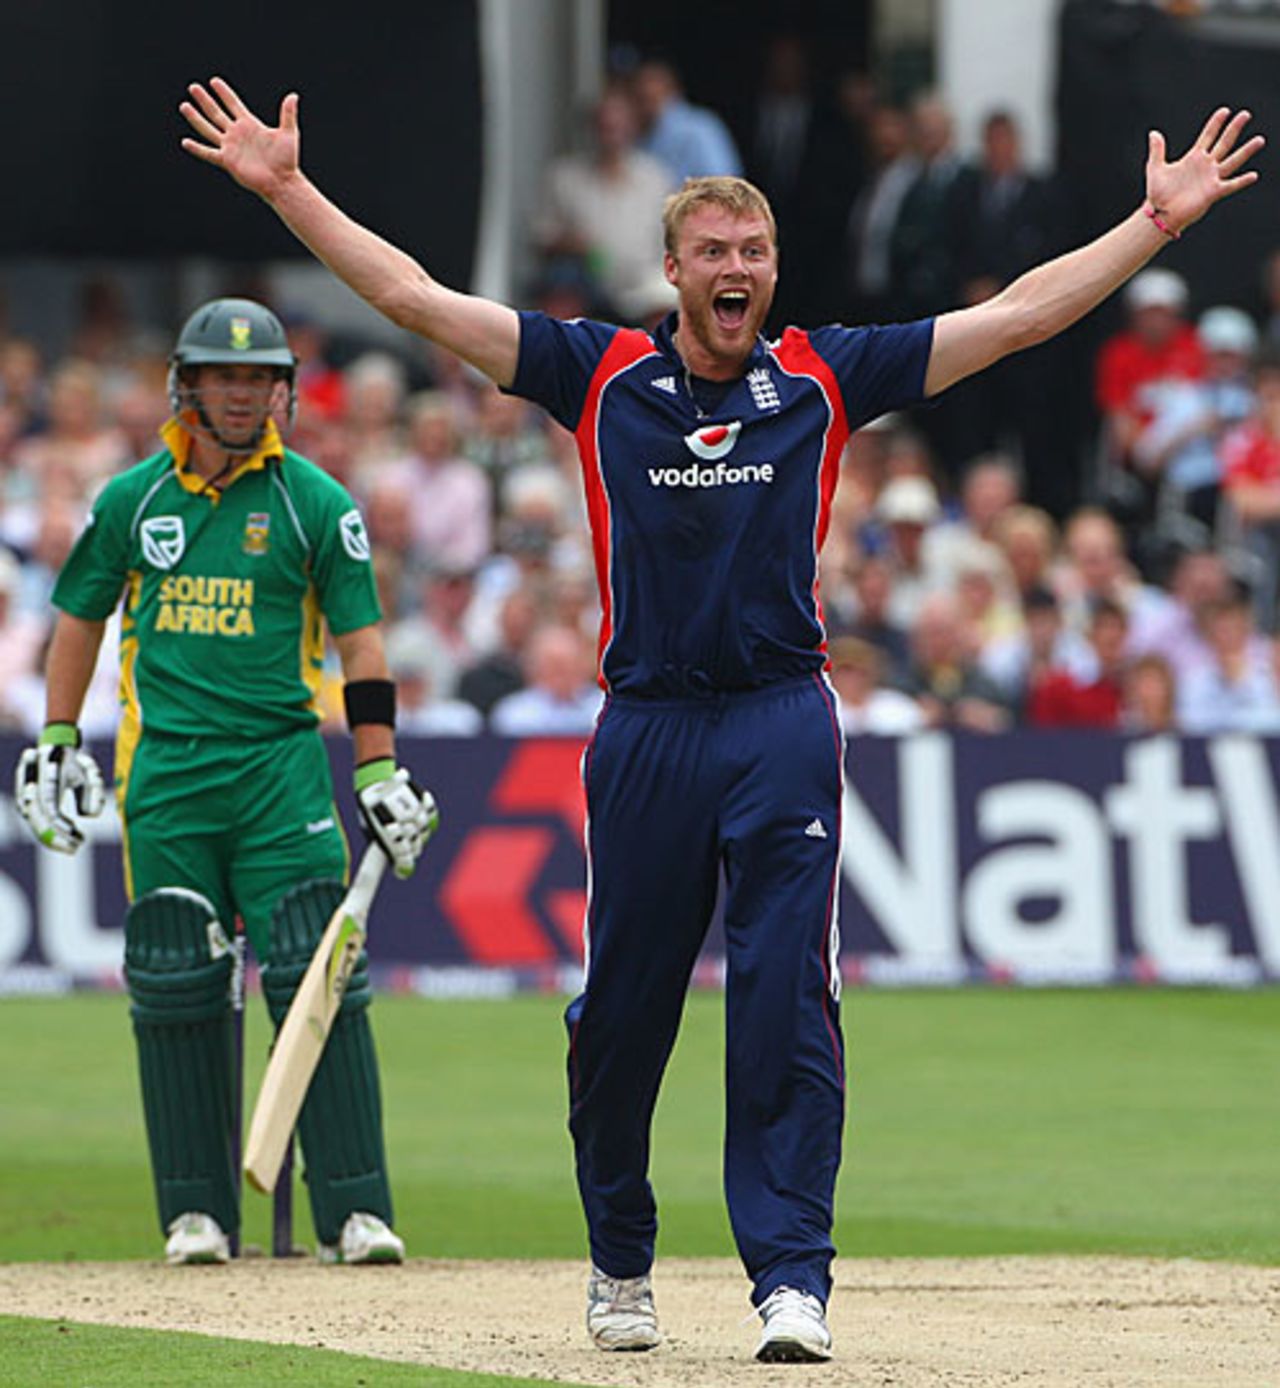 Andrew Flintoff celebrates the wicket of AB de Villiers, England v South Africa, 2nd ODI, Trent Bridge, August 26, 2008